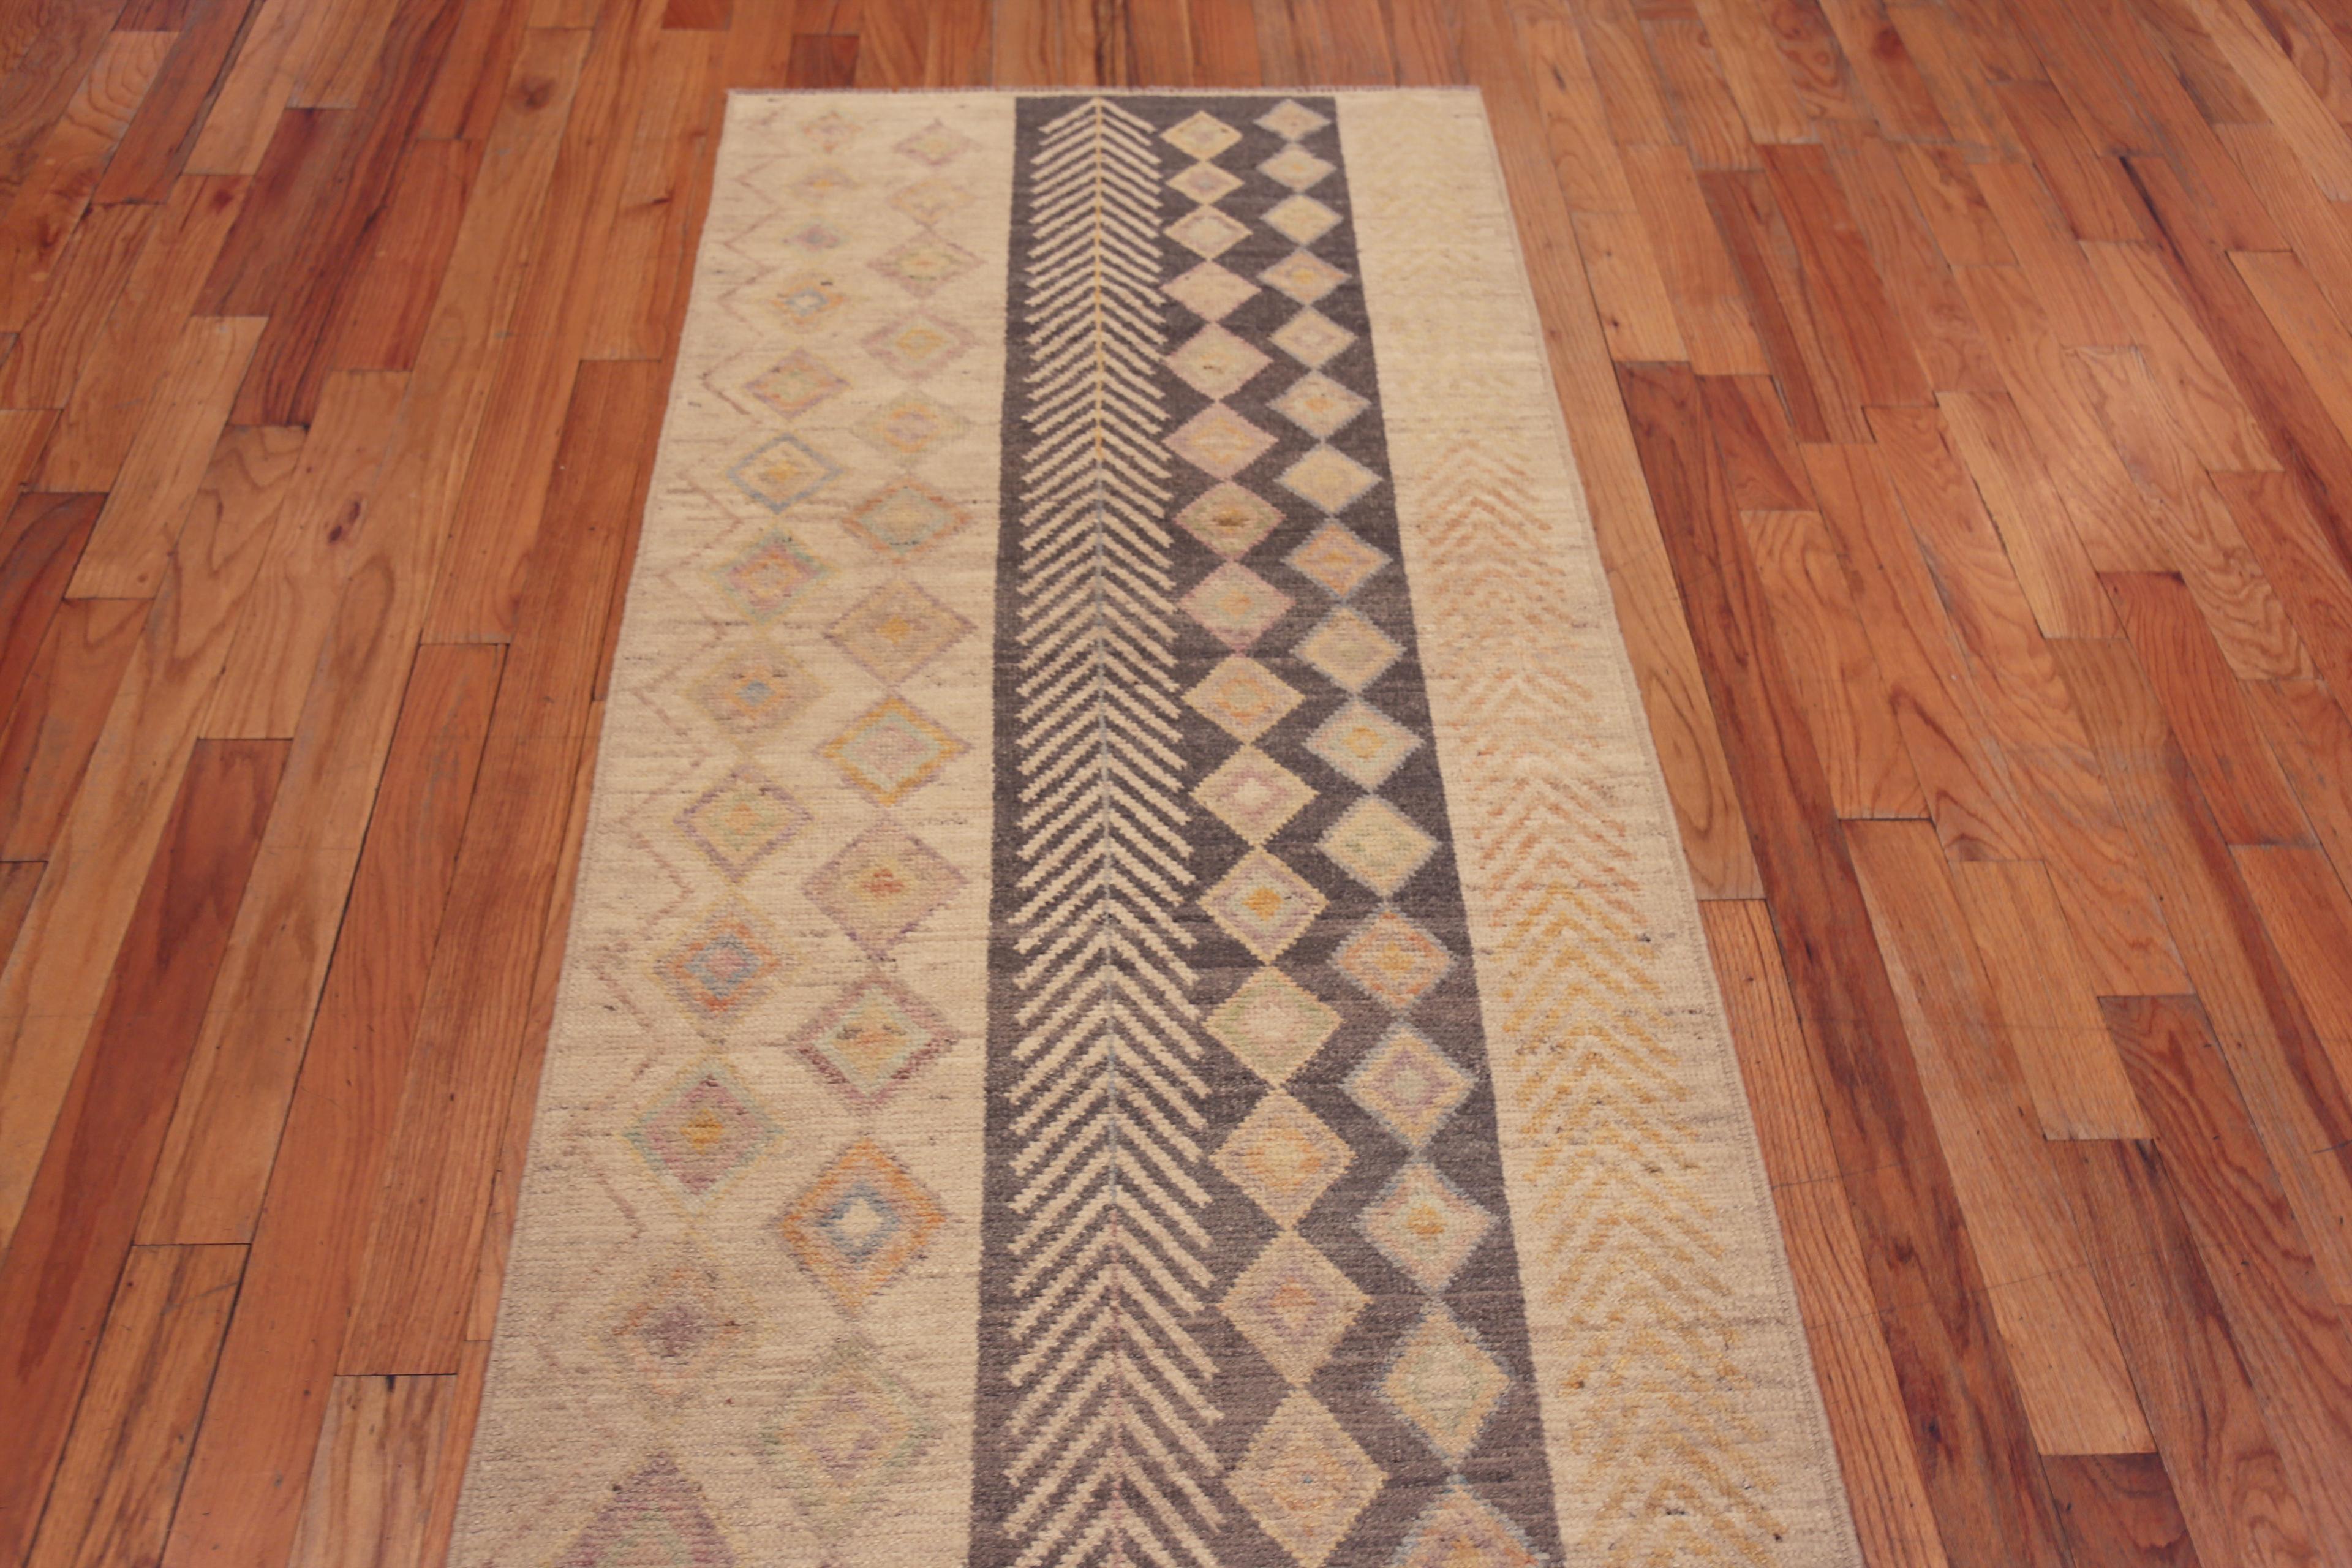 A Magnificently Artistic Tribal Geometric Design Modern Contemporary Hallway Runner Rug, Country Of Origin: Central Asia, Circa Date: Modern Rug 